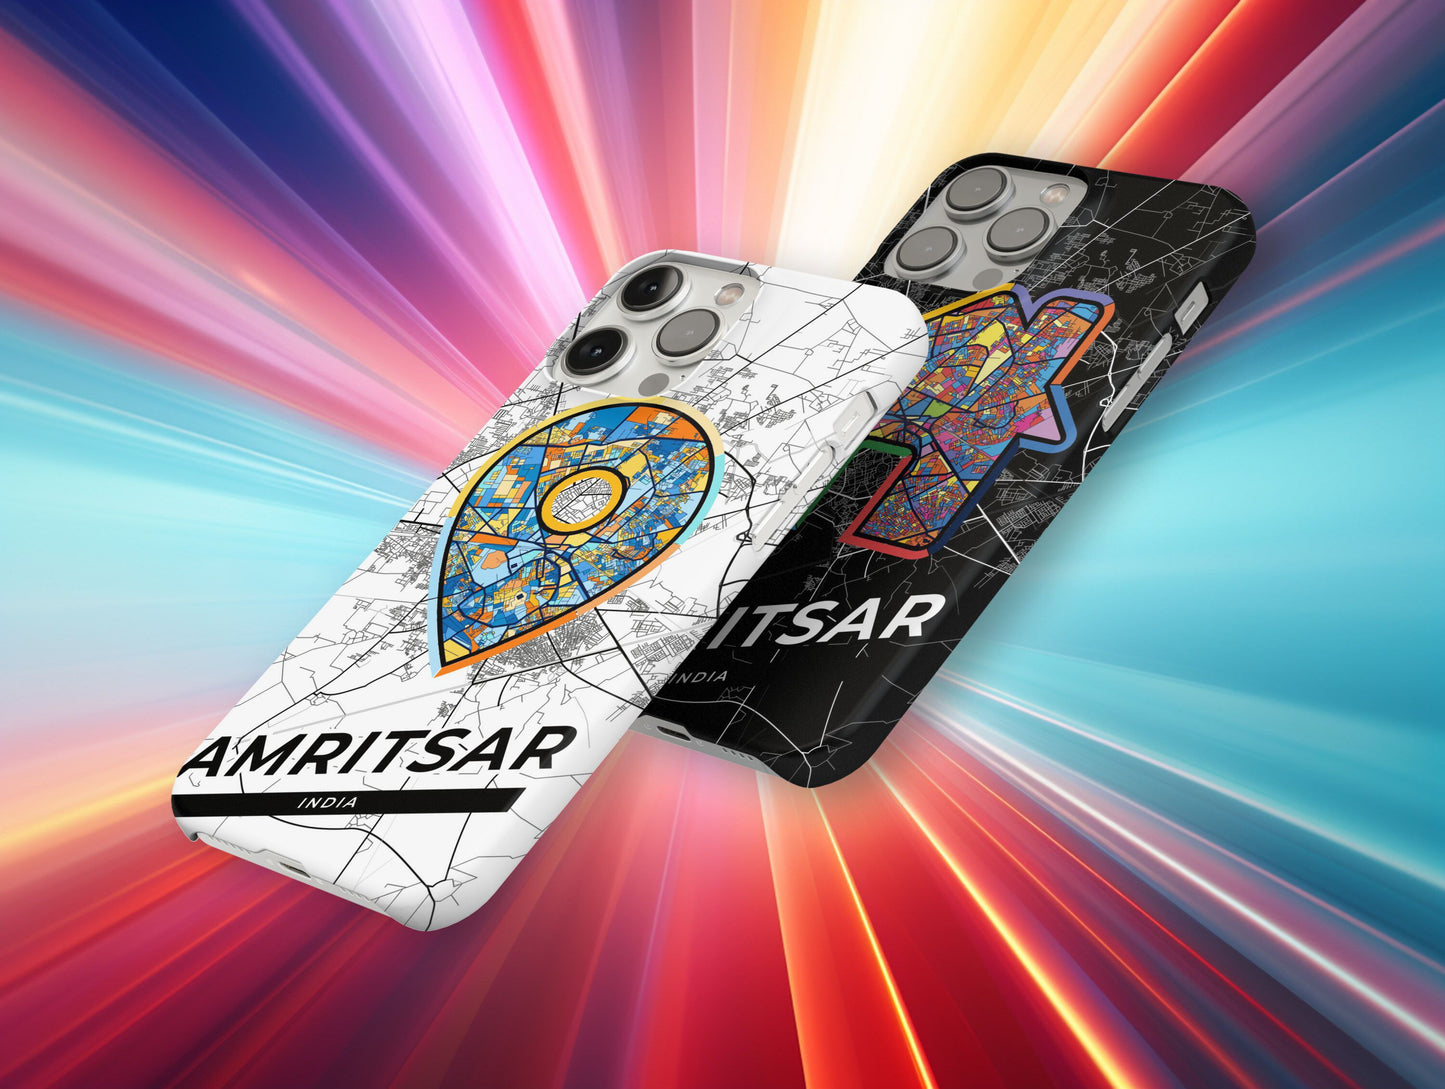 Amritsar India slim phone case with colorful icon. Birthday, wedding or housewarming gift. Couple match cases.